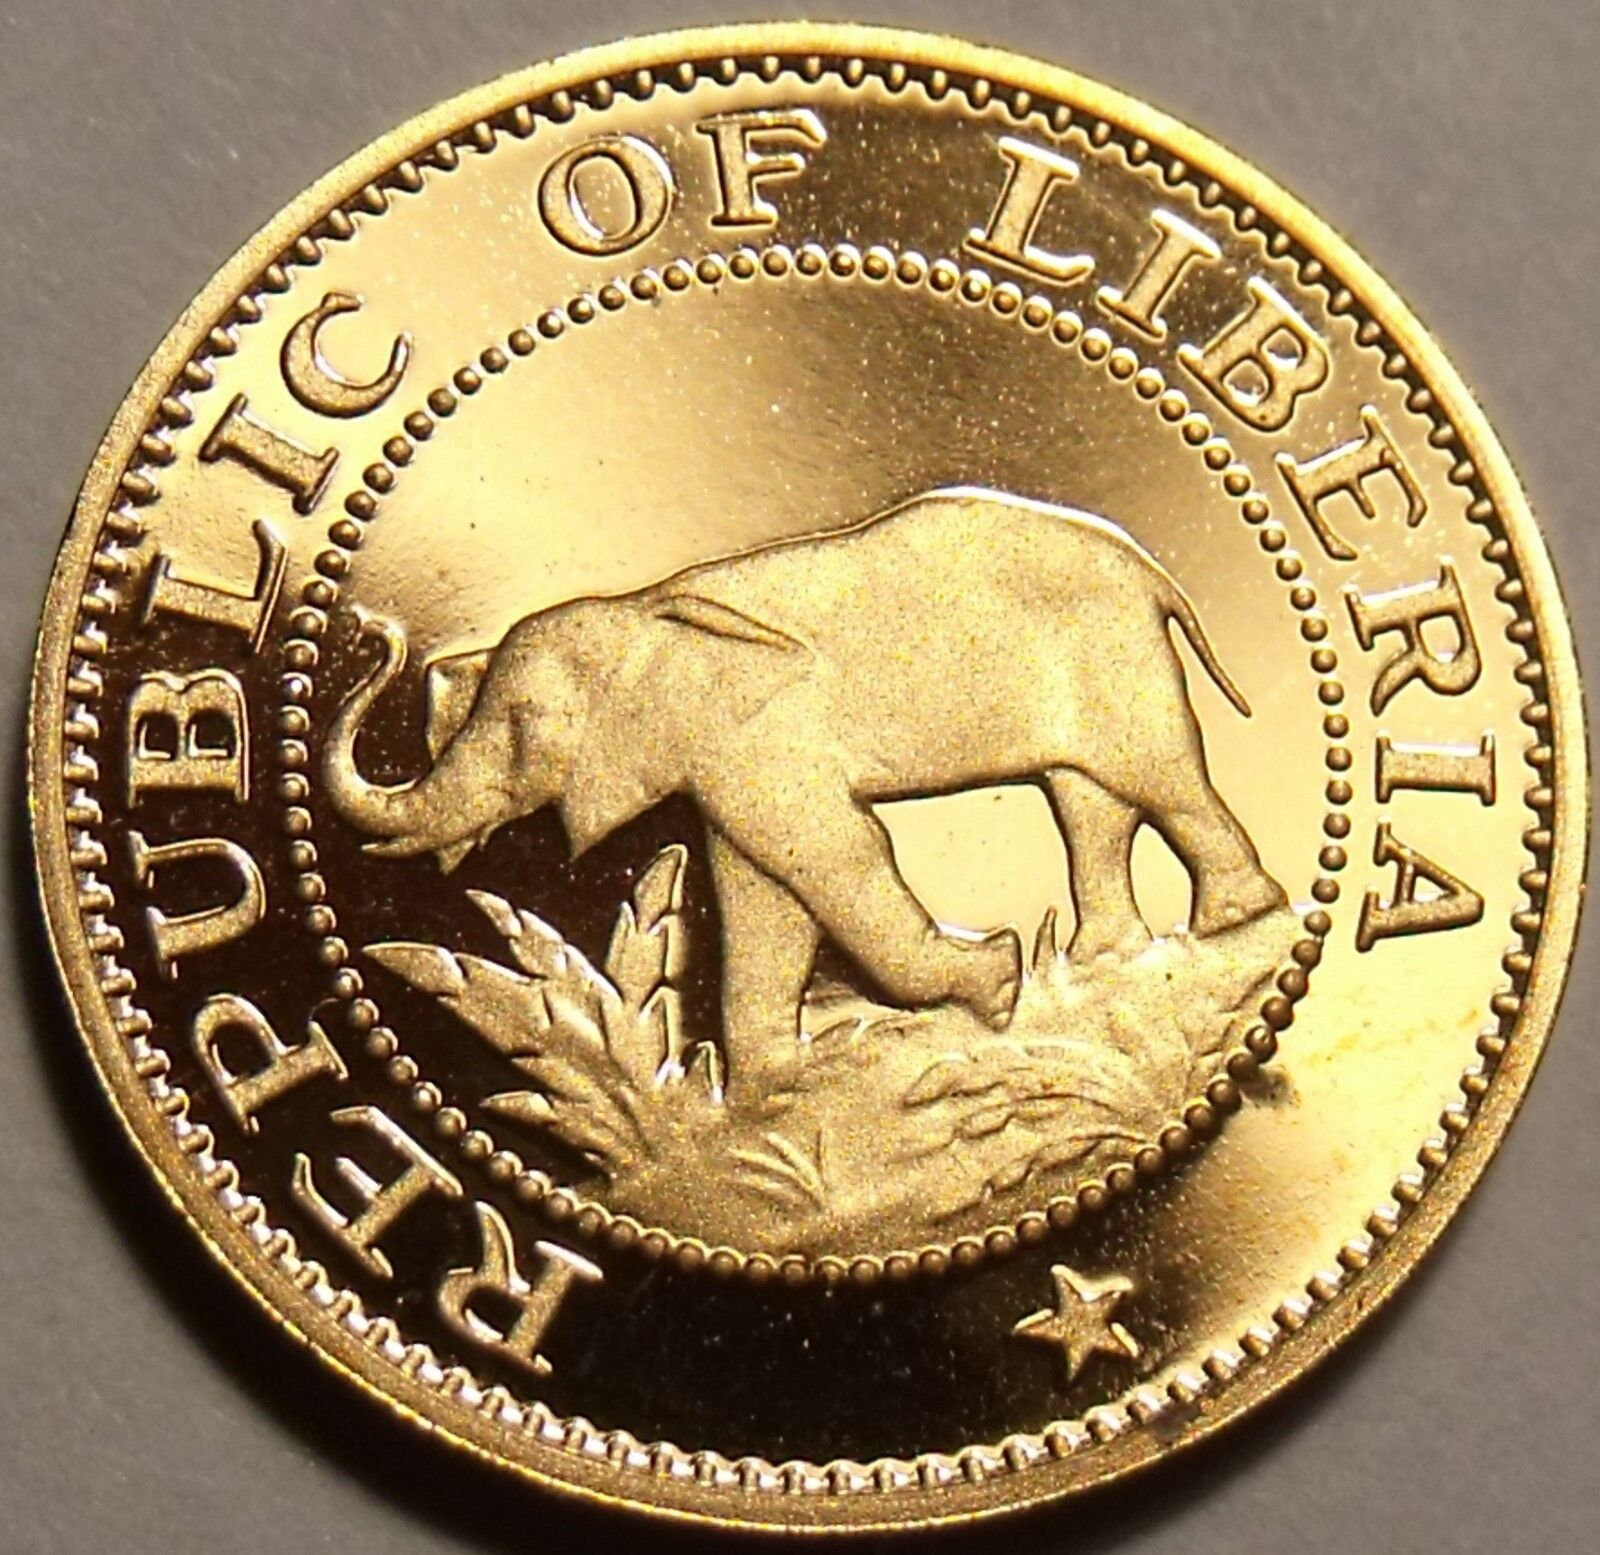 Rare Proof Liberia 1968 Cent~Only 14,396 Minted~Elephant Coin~Free Shipping